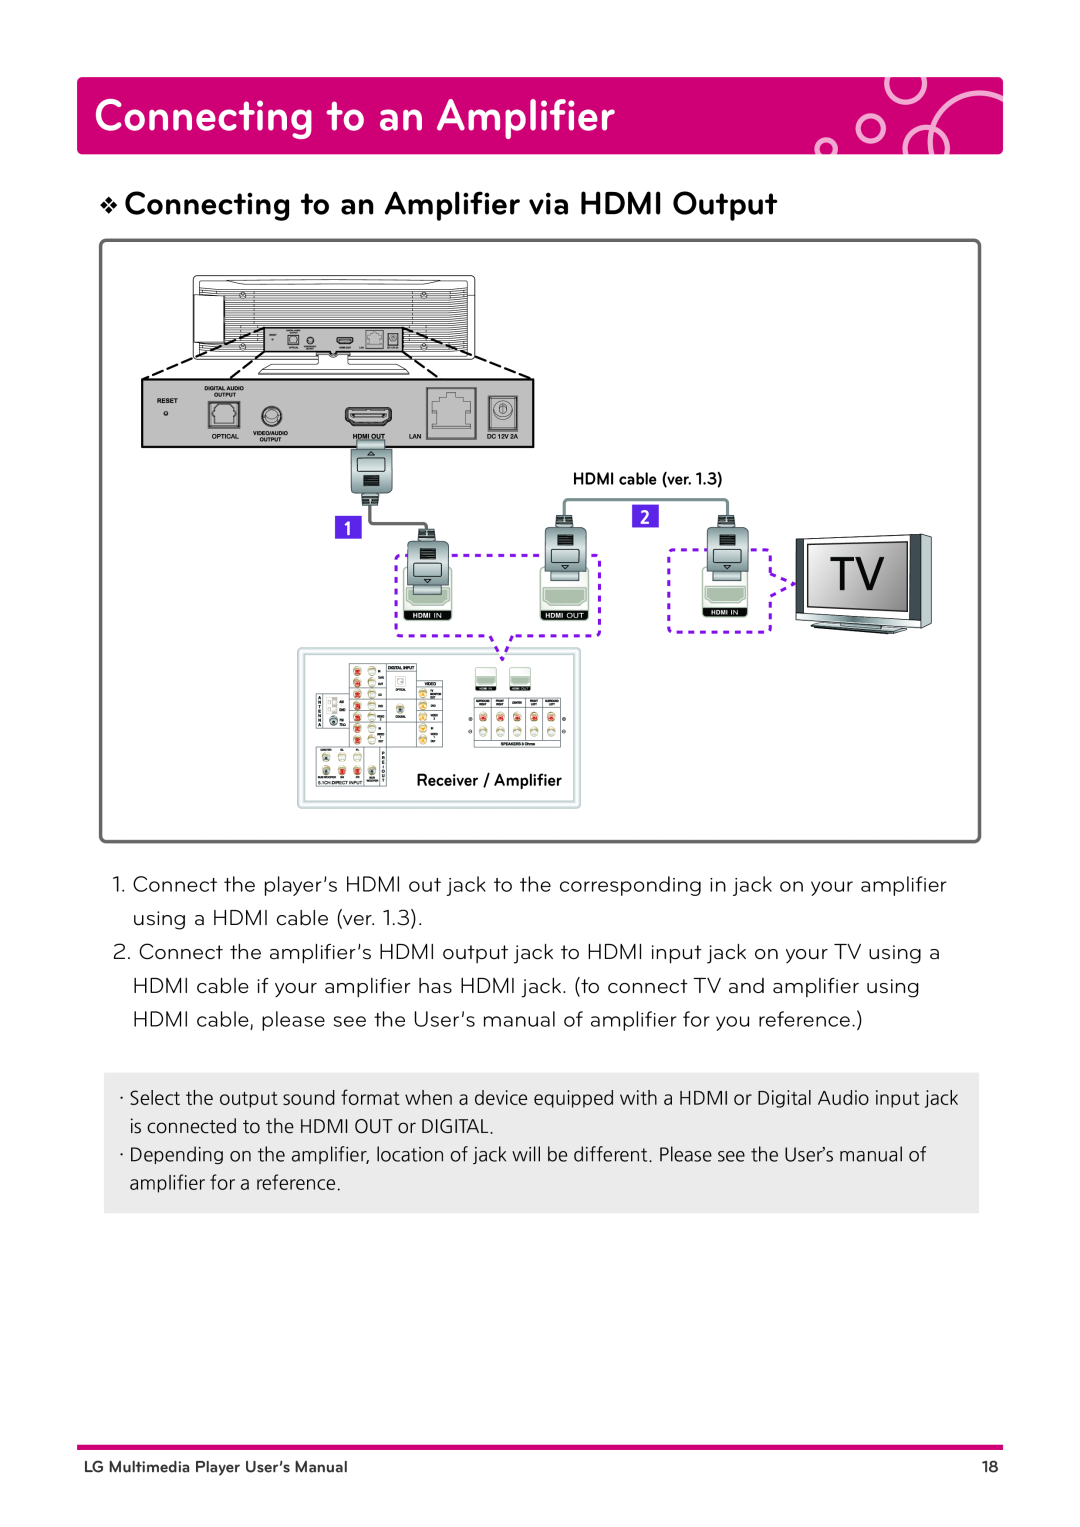 LG Electronics DP1B, DP1W user manual Connecting to an Ampliﬁer via HDMI Output, Connecting to an Amplifier, HDMI cable ver 